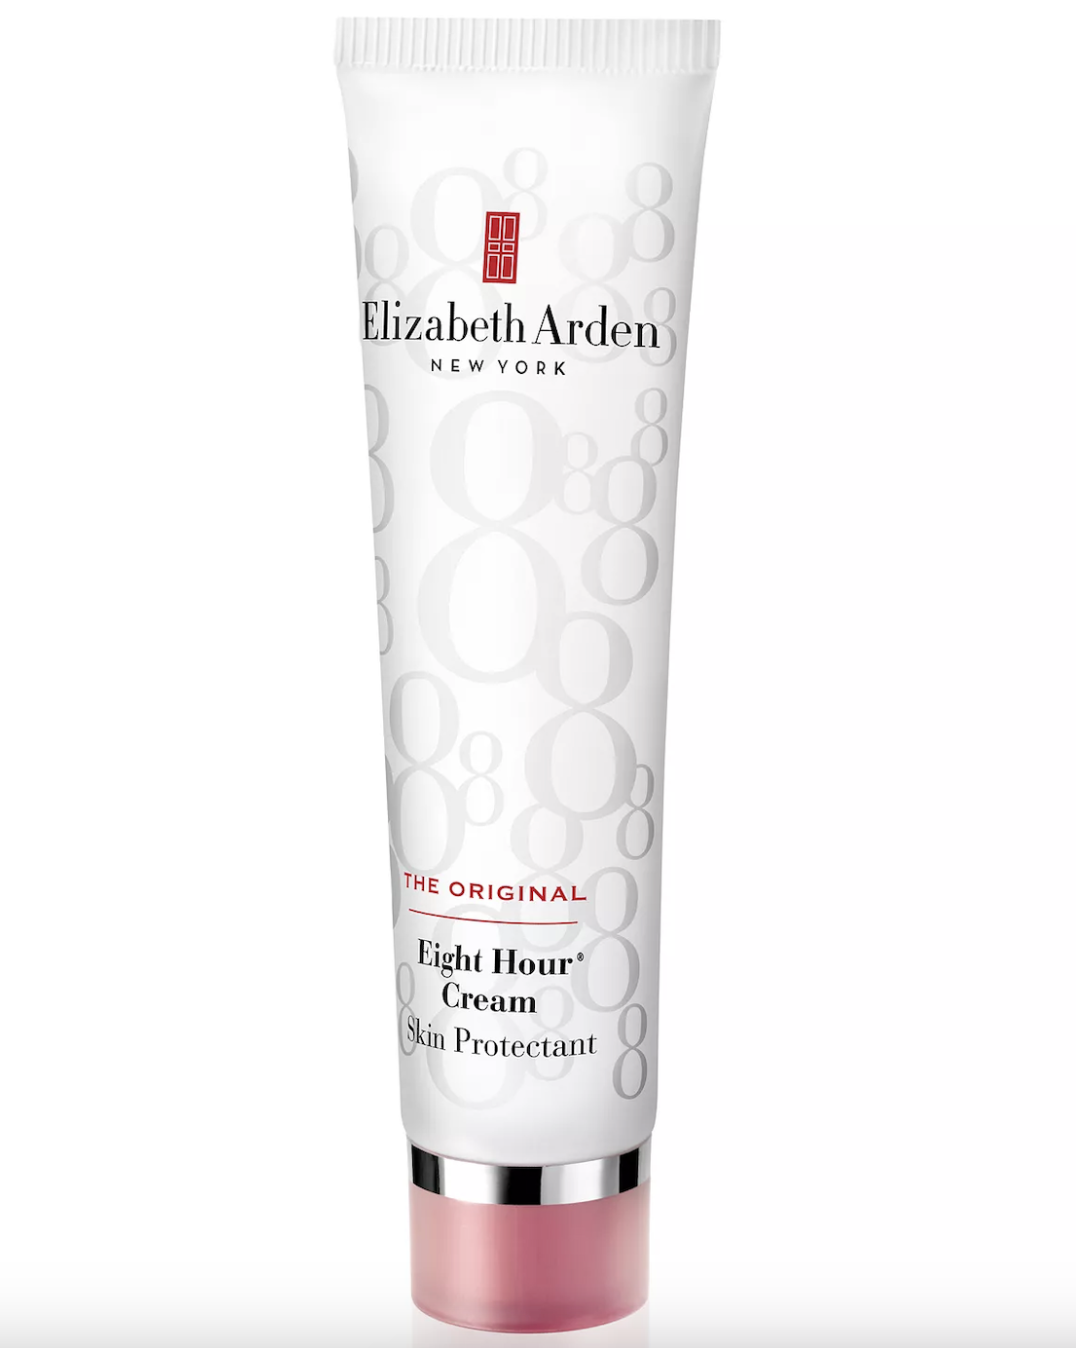 A container of skin protectant moisturizer cream from the brand Elizabeth Arden